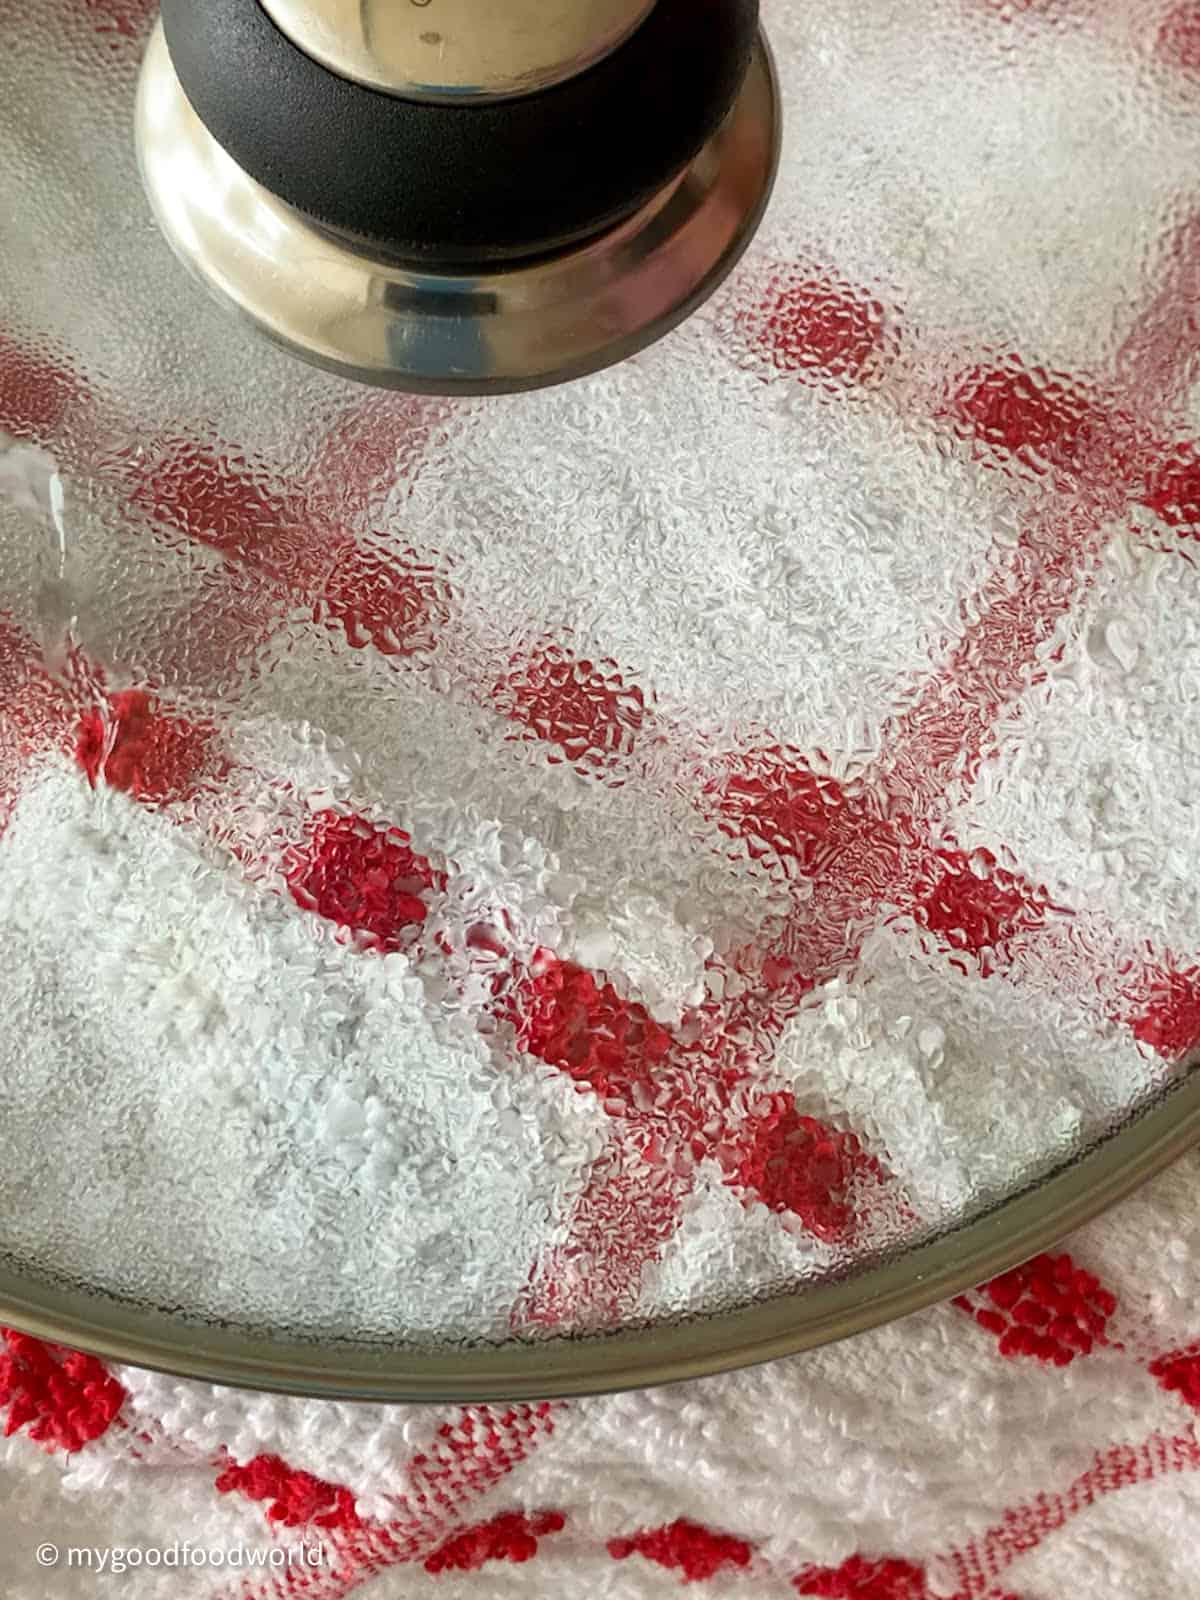 A red patterned white kitchen towel is covered by a round glass lid with a knob.